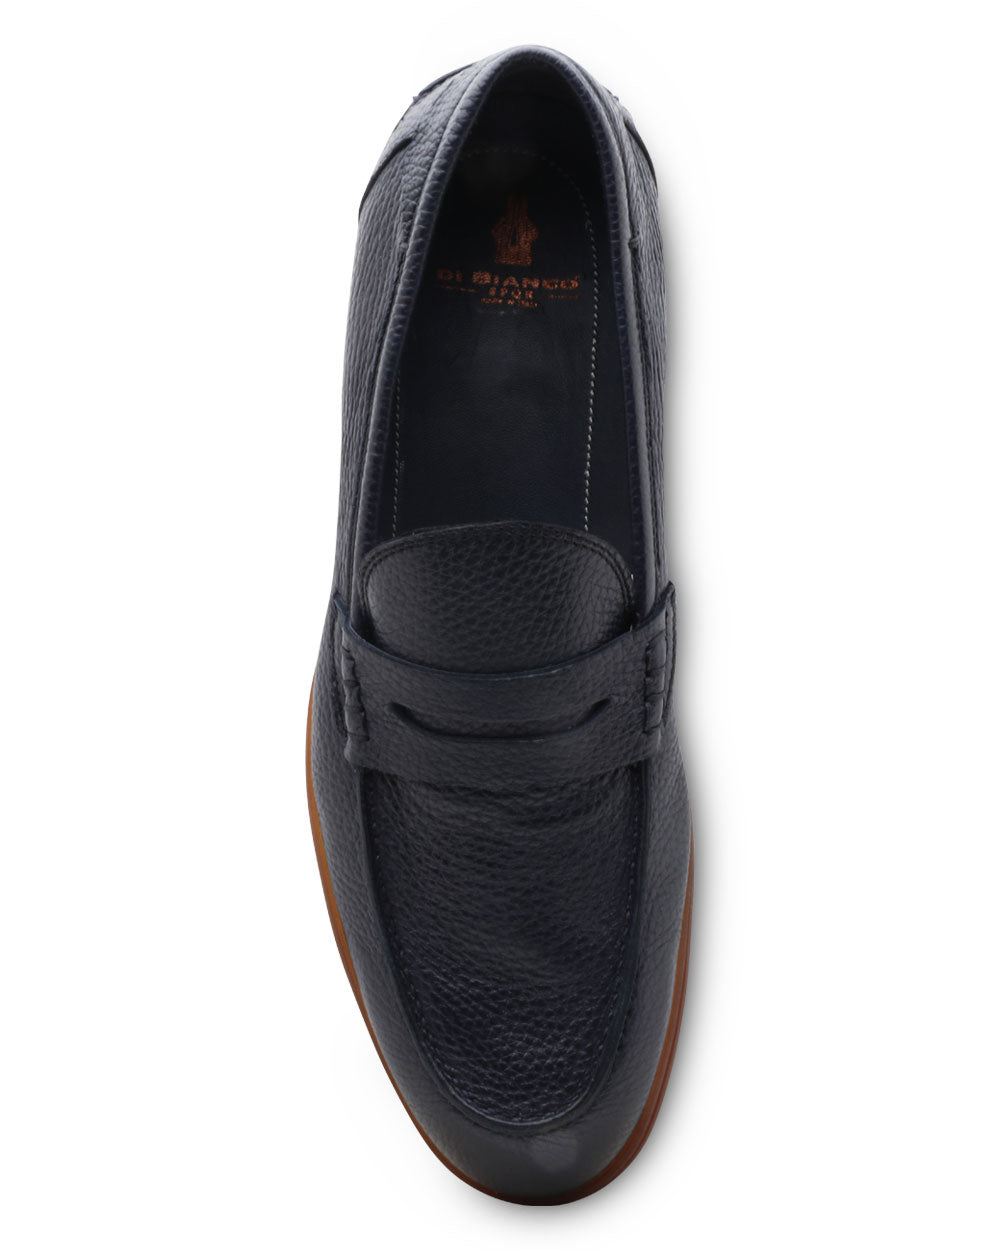 Leather Penny Loafer in Midnight Blue